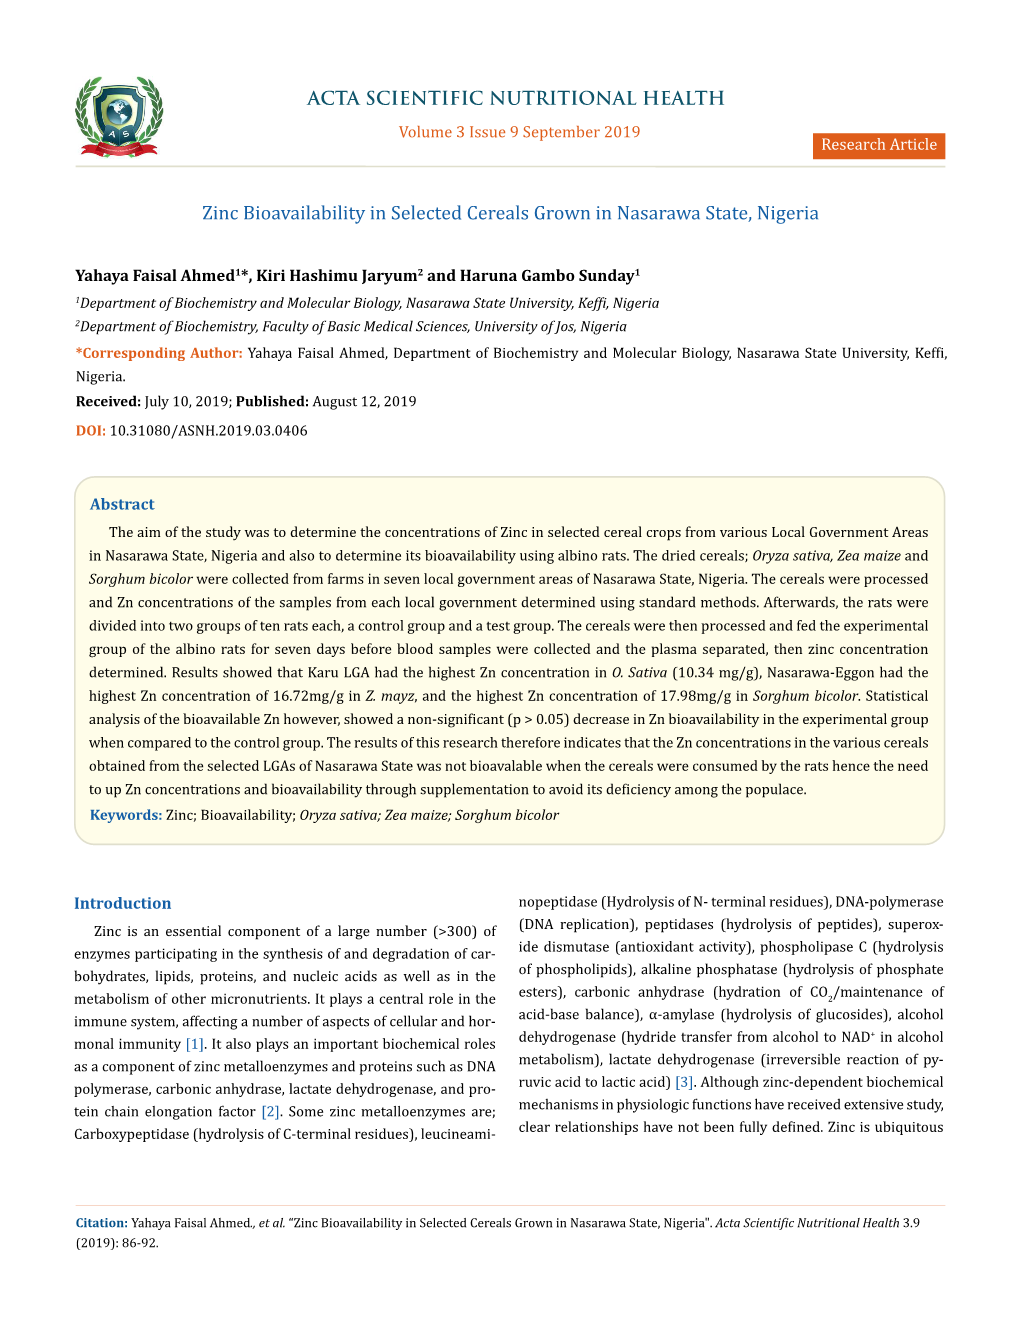 Zinc Bioavailability in Selected Cereals Grown in Nasarawa State, Nigeria